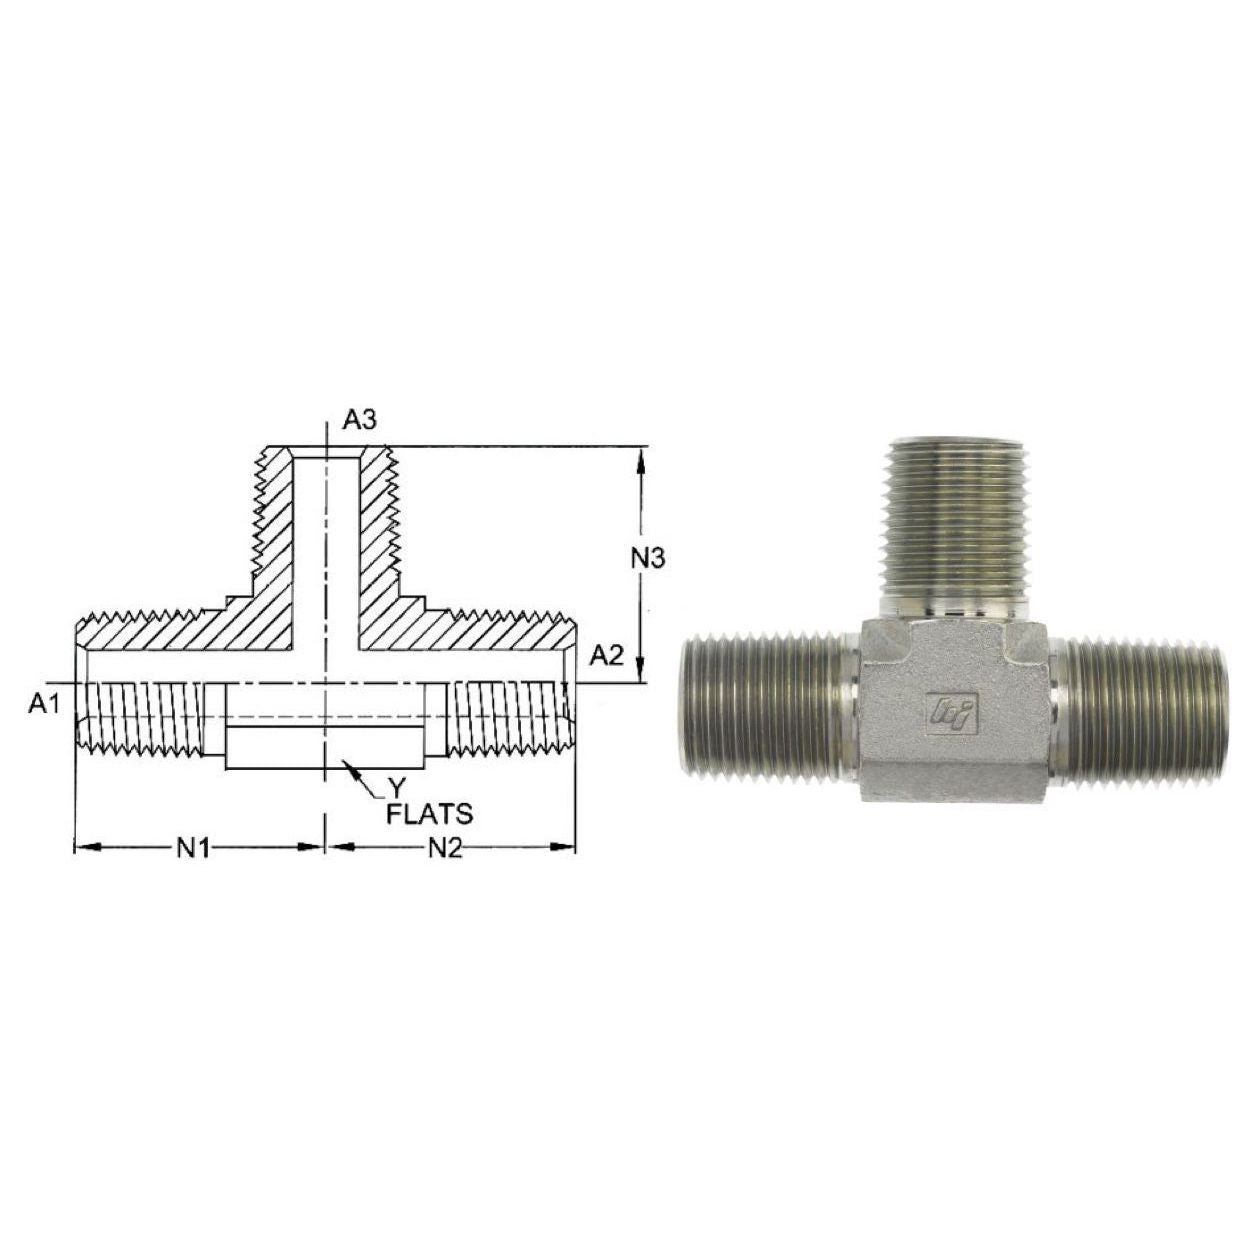 5600-08-08-08-SS : OneHydraulics Tee, 0.5 (1/2) Male NPT x 0.5 (1/2) Male NPT x 0.5 (1/2) Male NPT, Stainless Steel, 7200psi